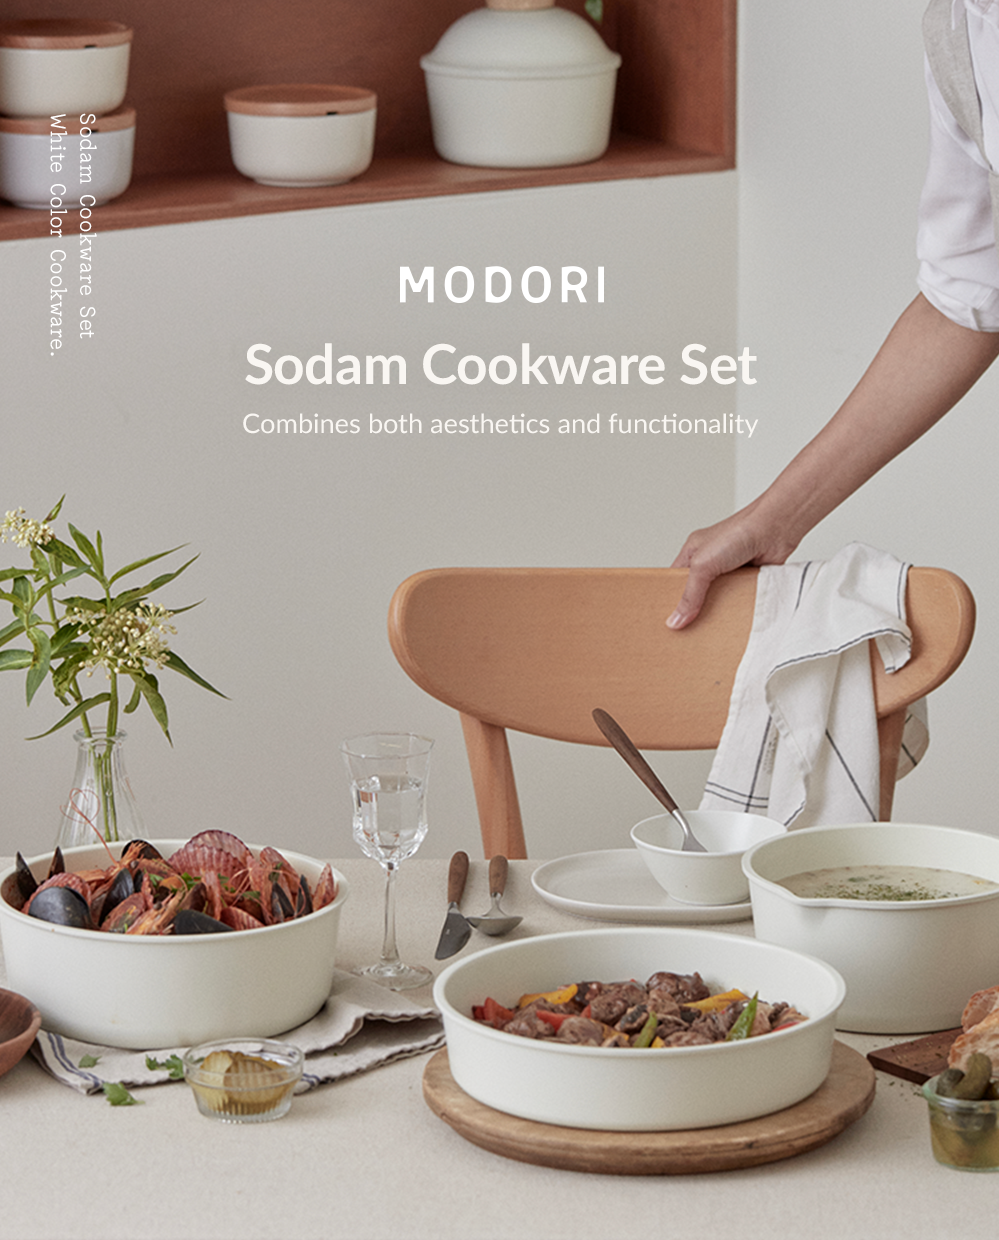 Modori Sodam Cookware Set is a stackable and detachable handle 3-piece cookware set that allows you to organize your kitchen space easily. Made of 98% pure aluminium alloy and natural mineral sand ceramic composition. You can use them on gas cooktops, induction cooktops, IH cookware, black ceramic cookware, and ovens.  Sodam collection has a practical design and minimalist colours that will suit any kitchen. Modori is the key to designing your dream kitchen.